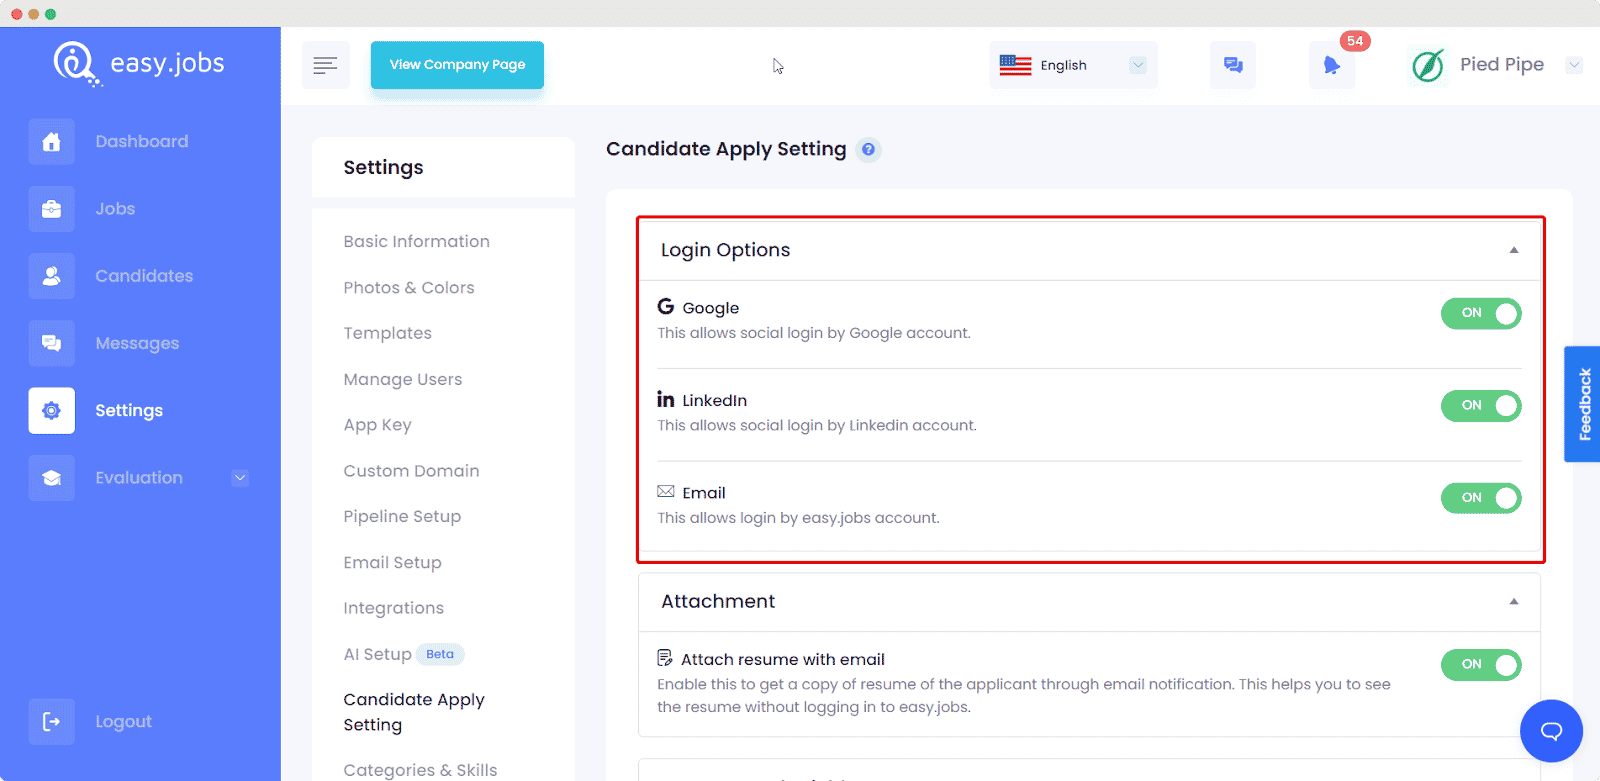 Candidate Apply Settings 2